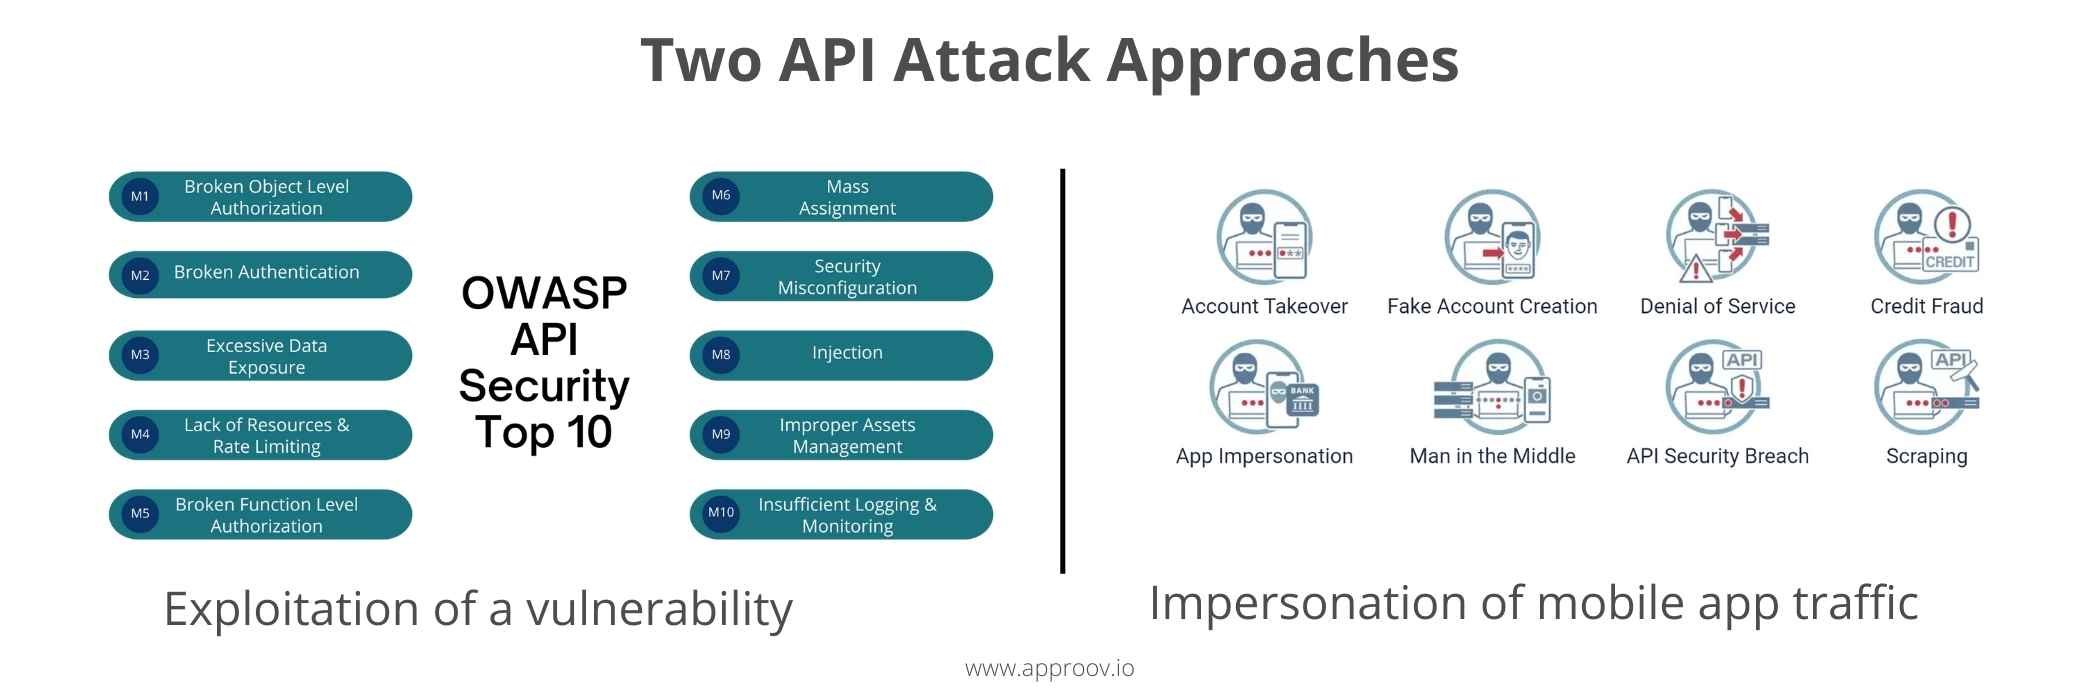 Approov graphic - Two API Attack Approaches